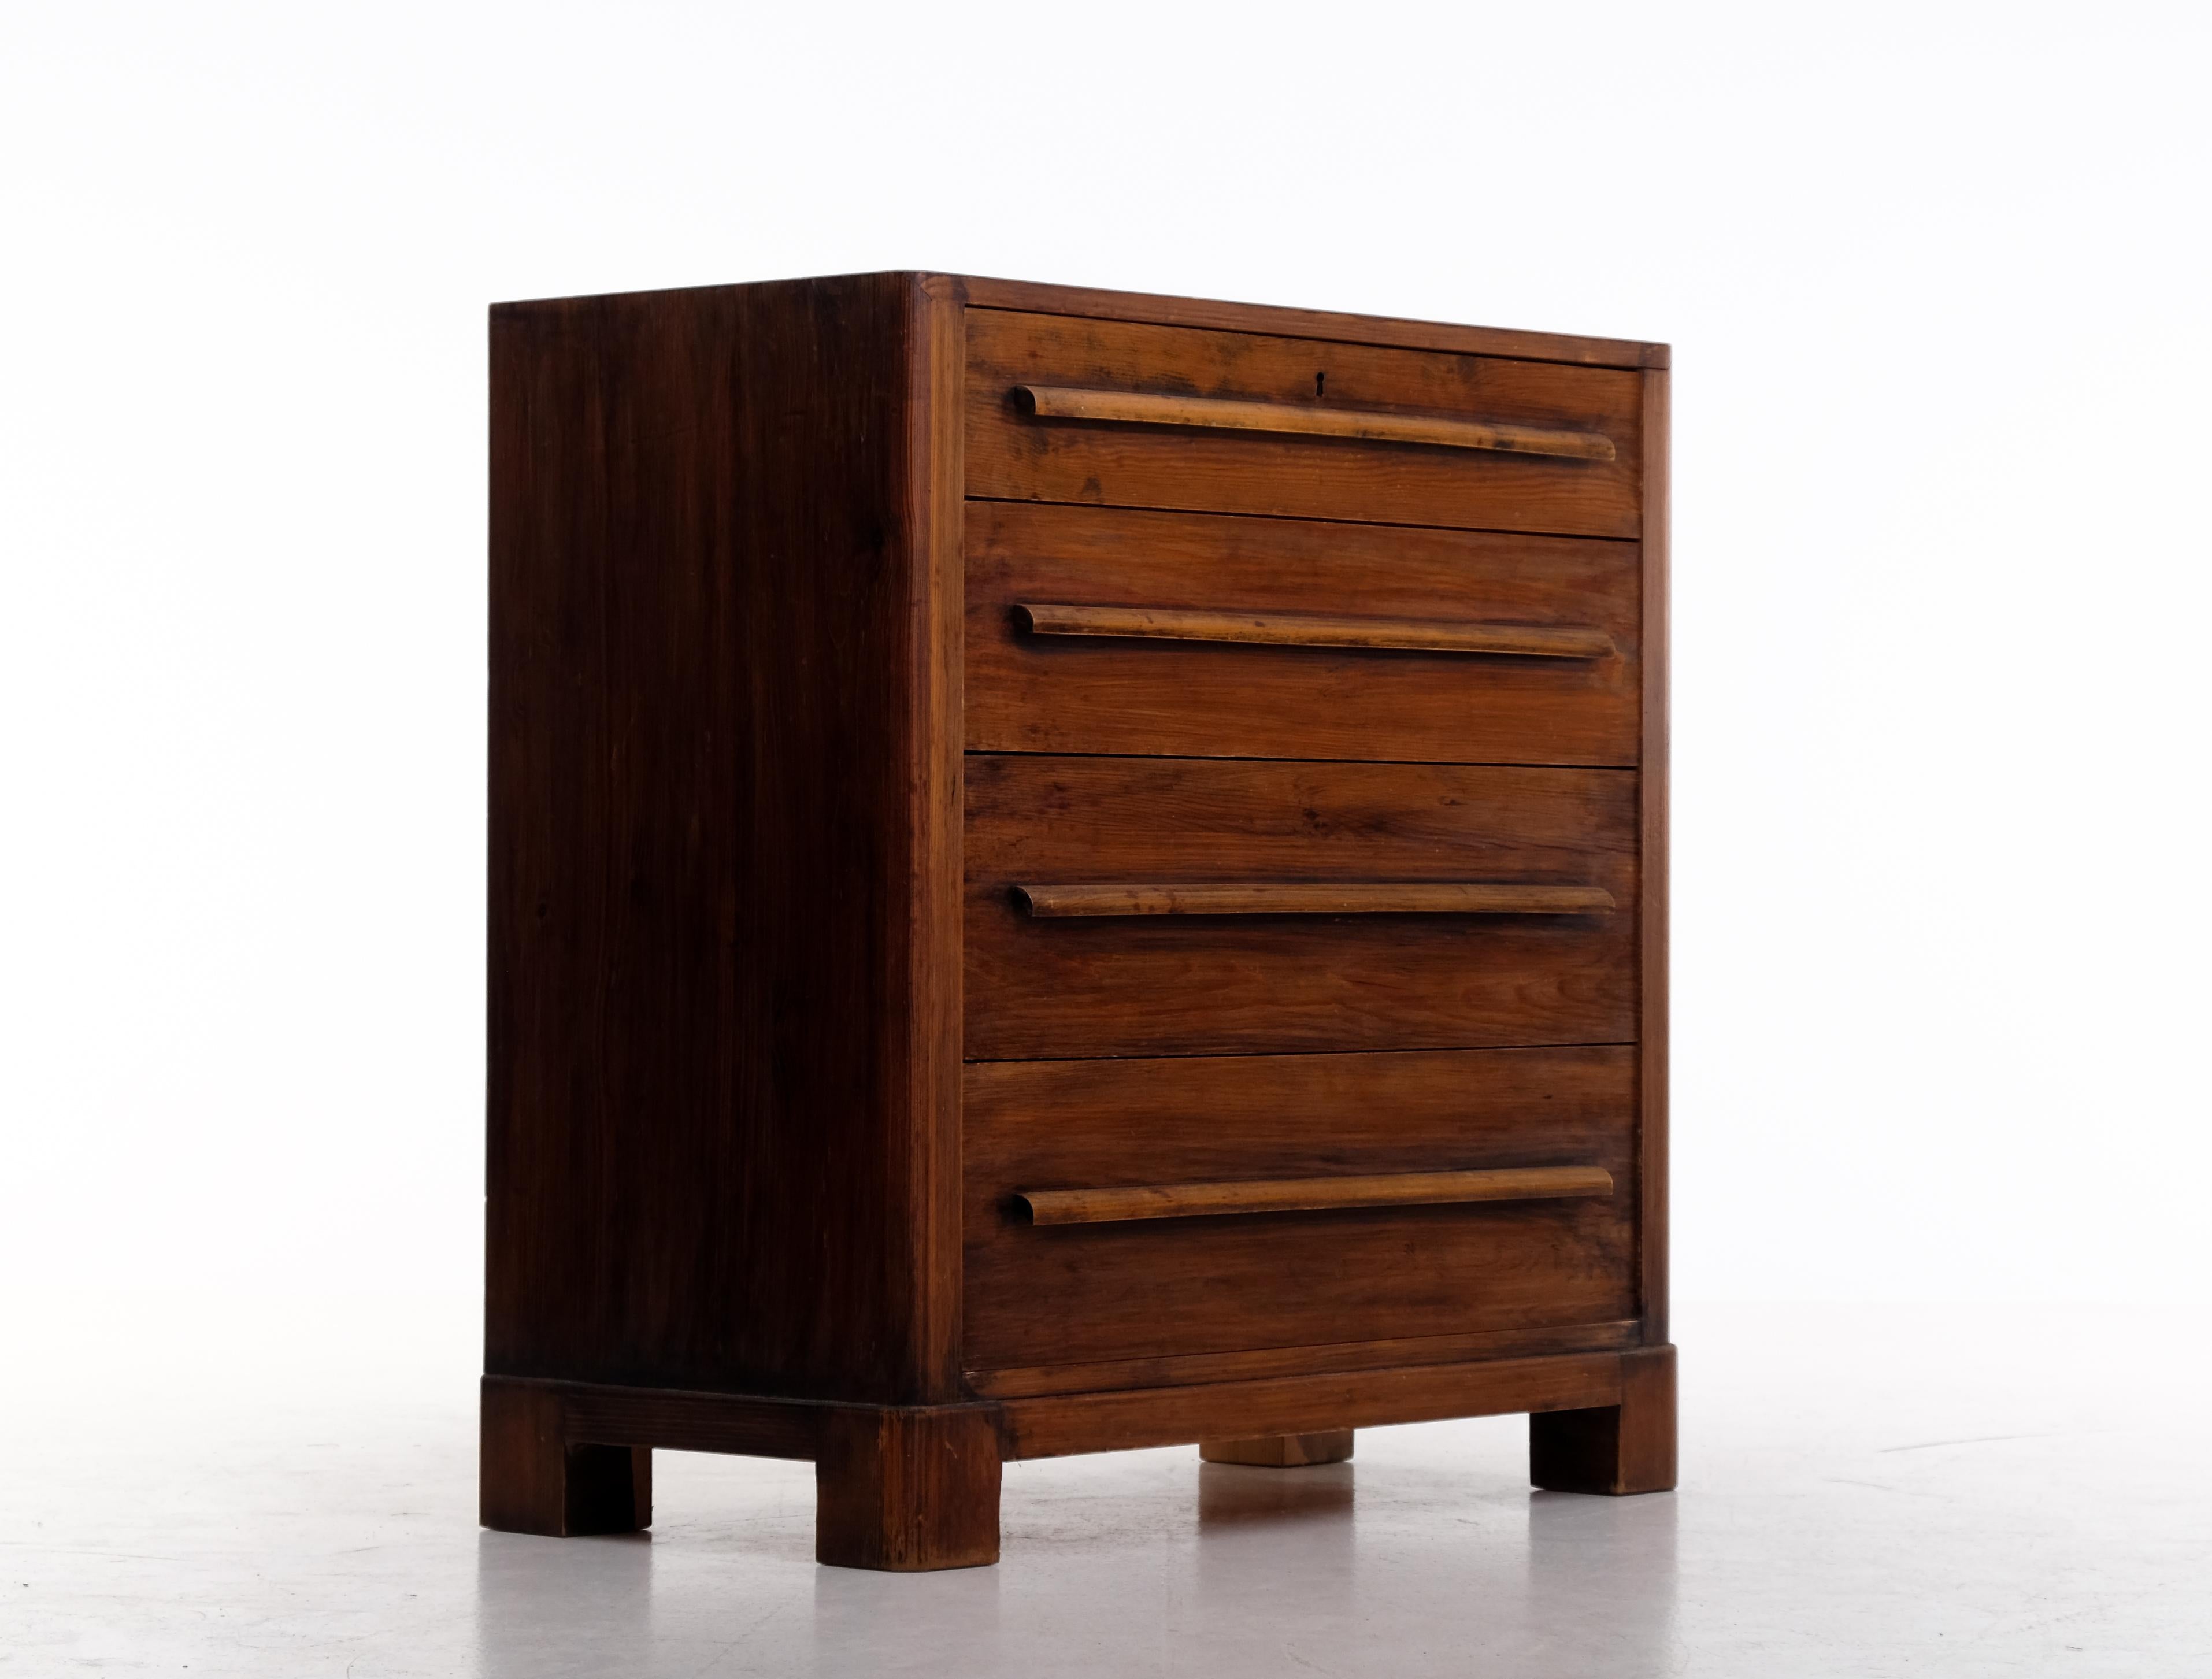 Rare Swedish bureau / chest of drawers in dark stained pine. Produced in Sweden, 1930s.
